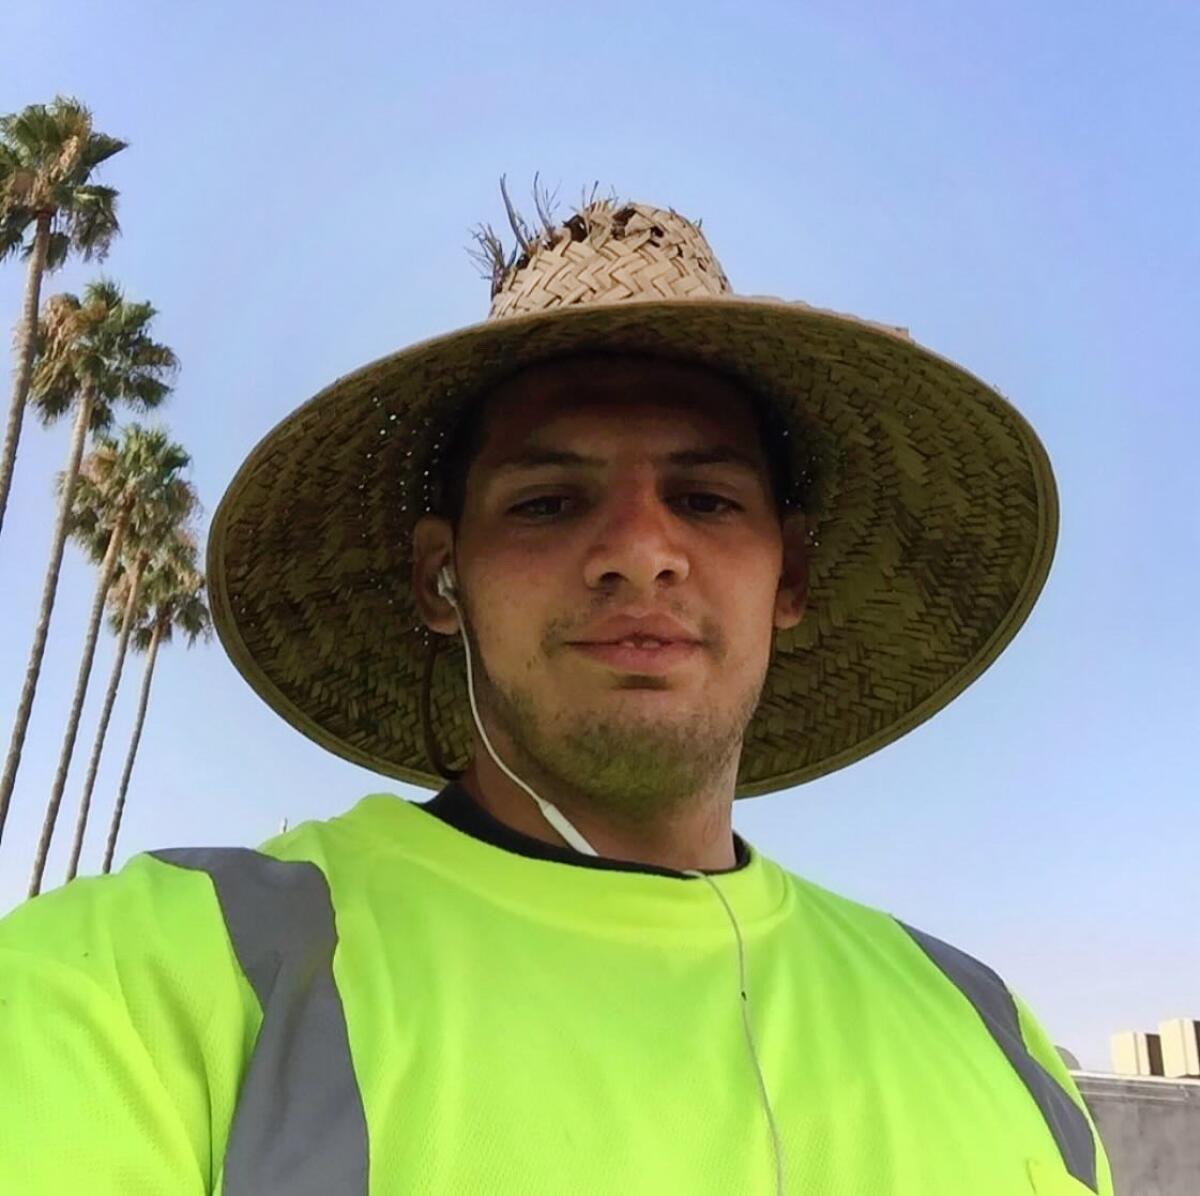 A self-portrait of Robert Brown wearing a neon yellow shirt, wired earbuds and a wicker hat with palm trees in the background